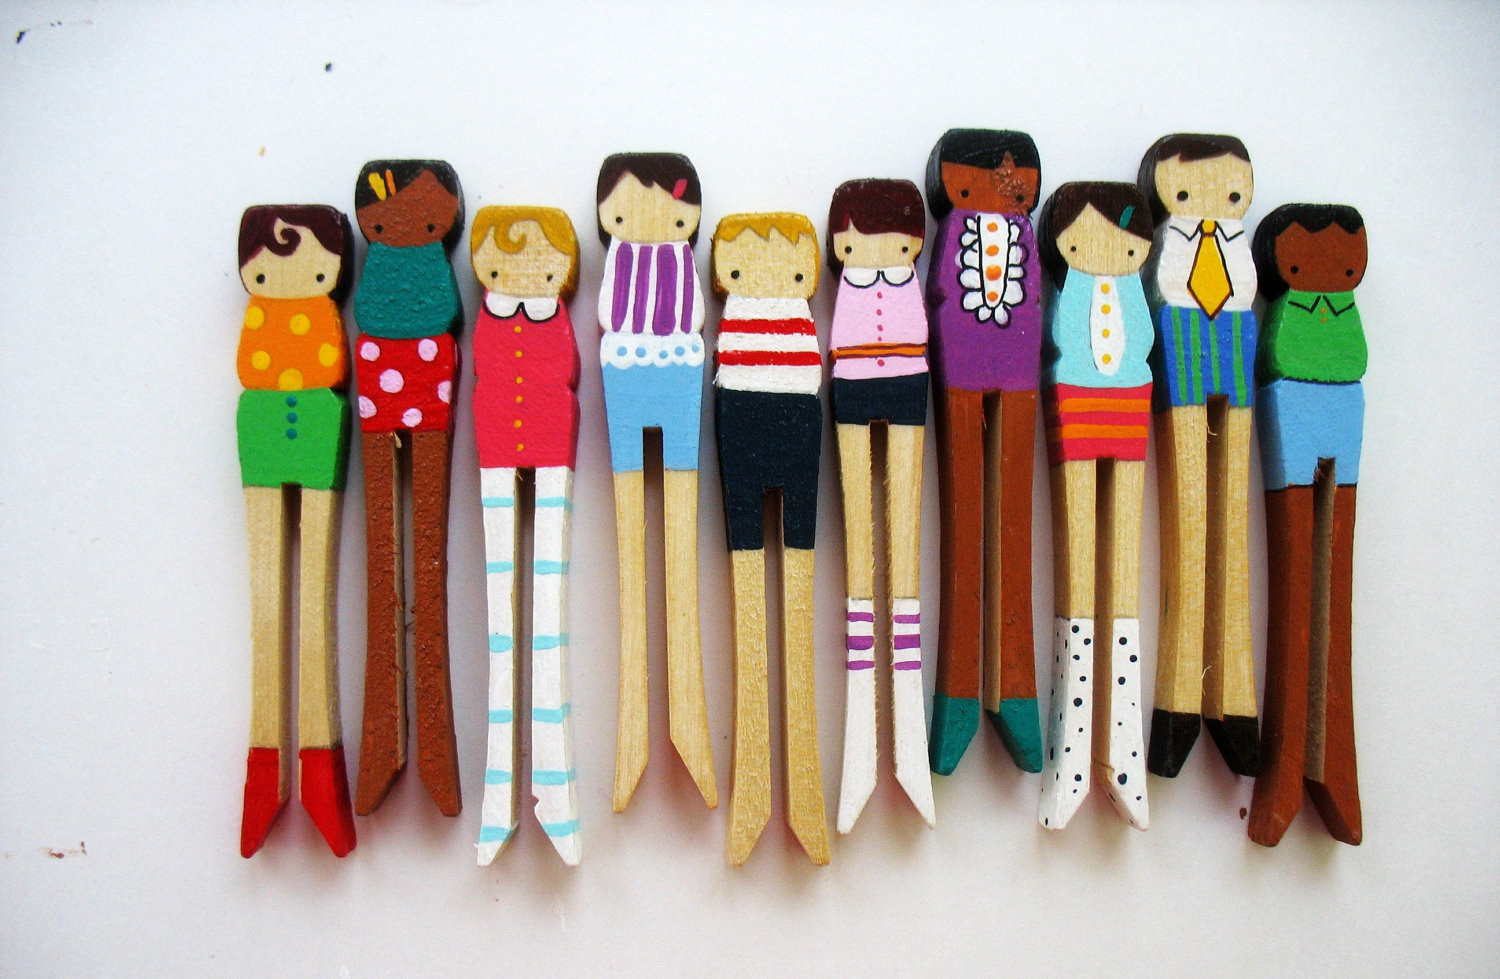 Craft Ideas Using Wooden Clothes Pegs
 handmade wooden folk art clothespin dolls RESERVED FOR